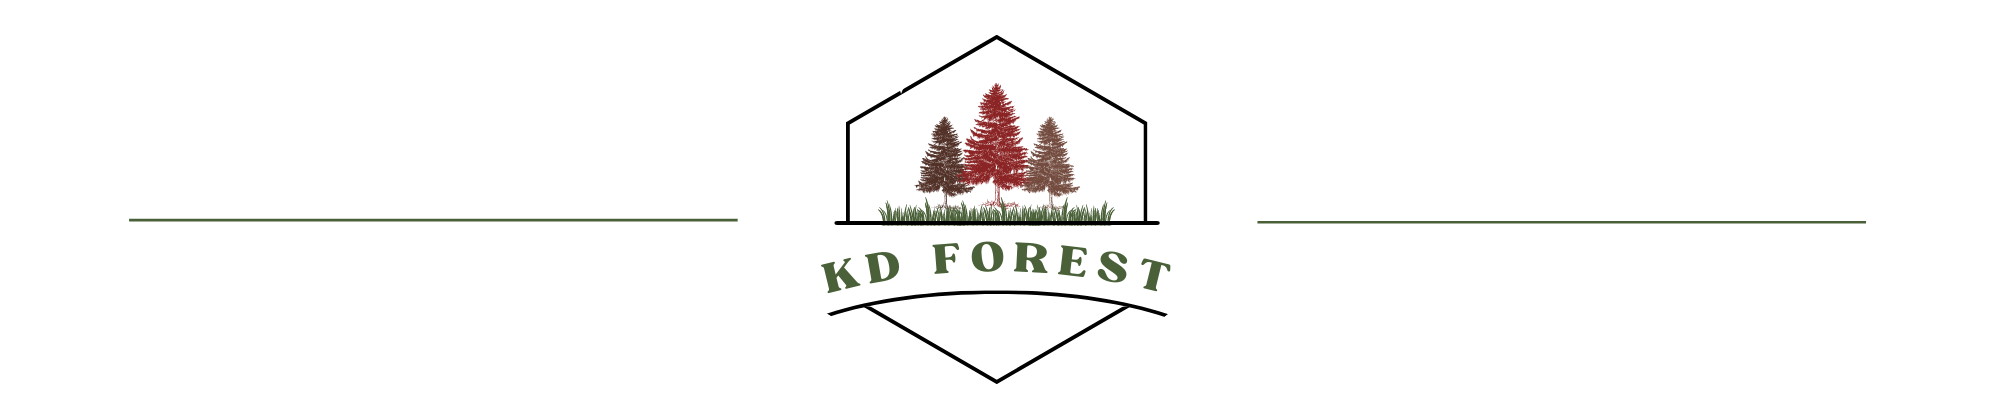 KD Forest